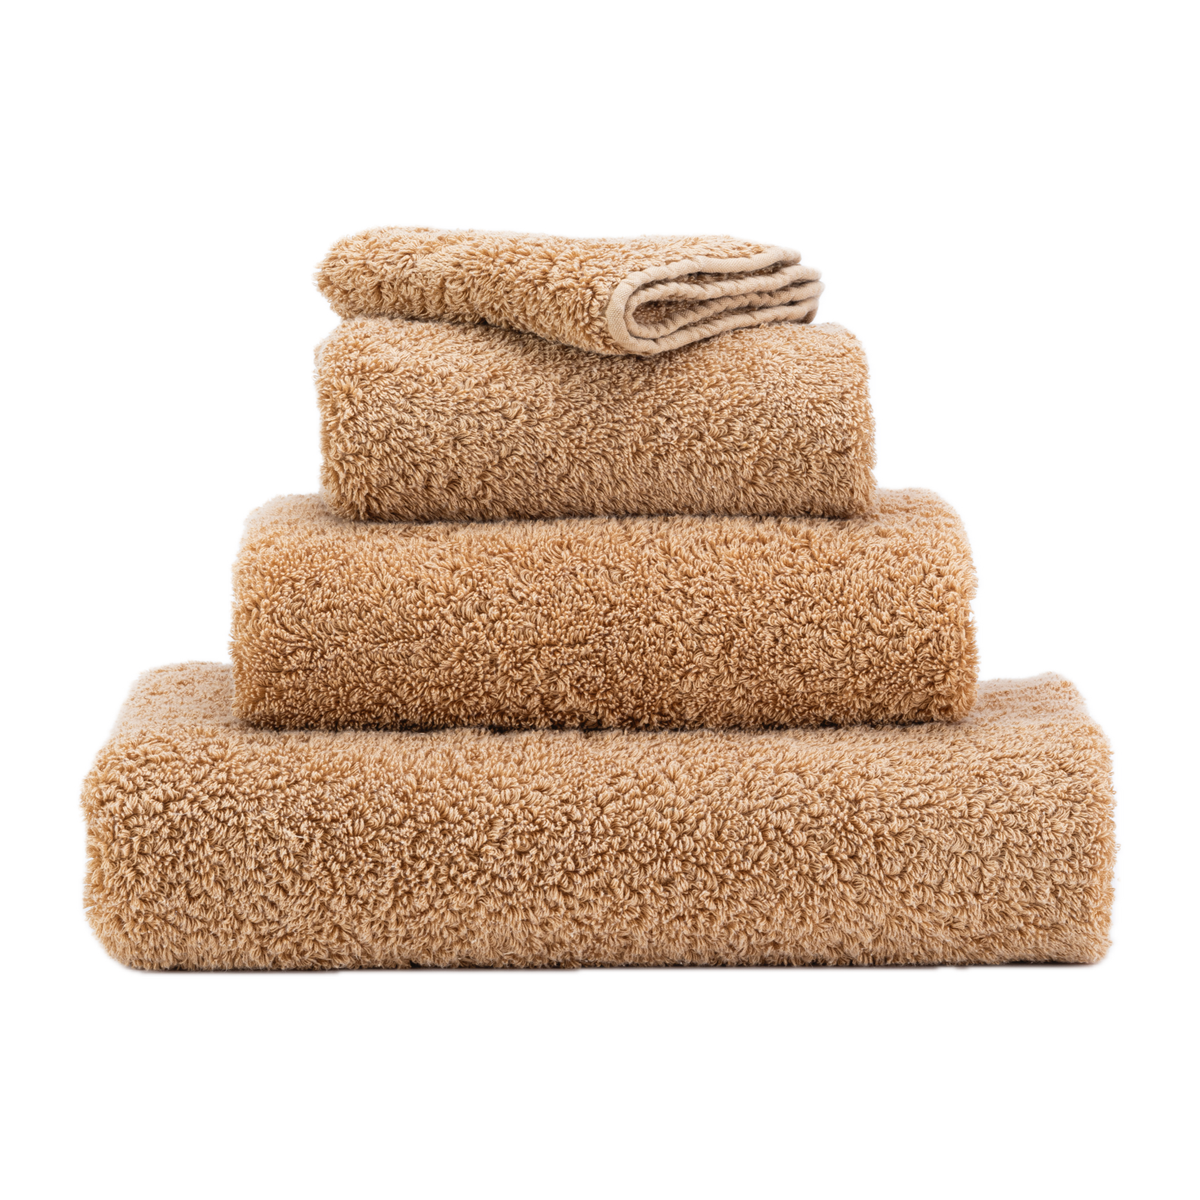 Stack of Abyss Super Pile Bath Towels in Croissant Color